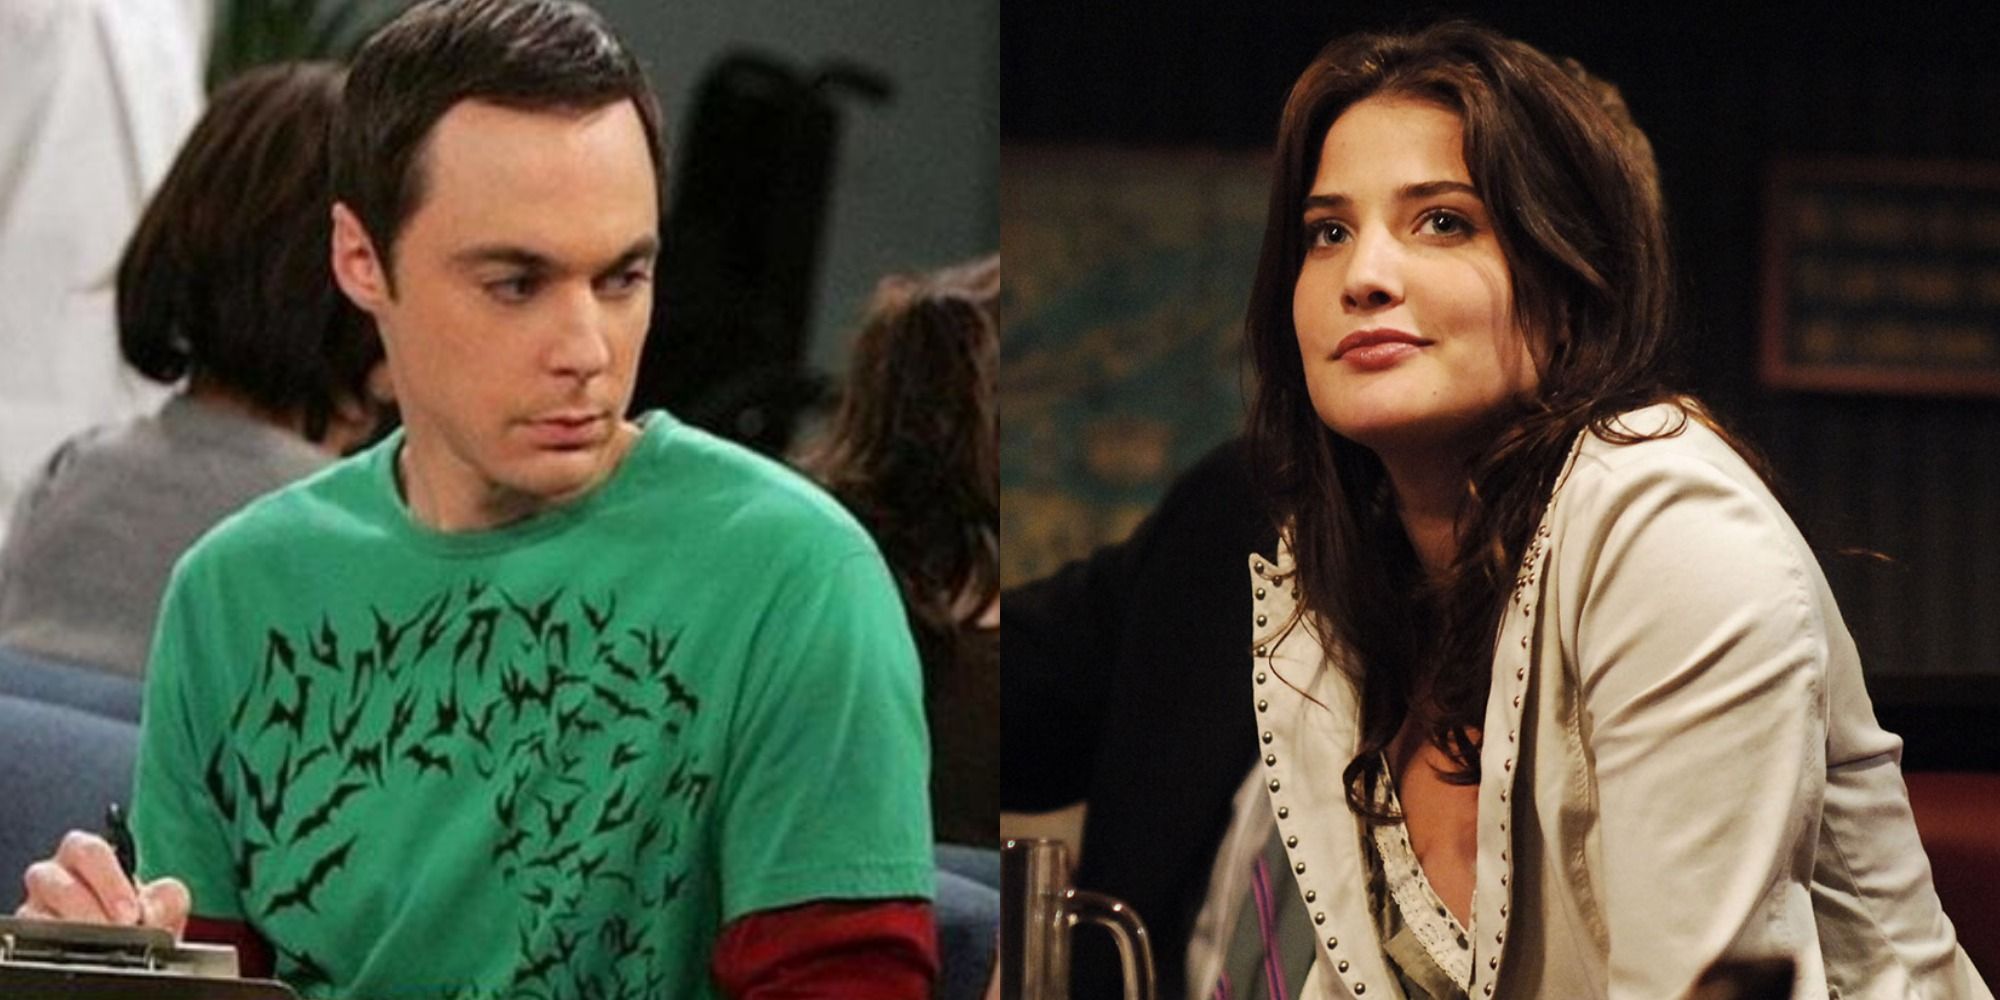 A split-screen image showing The Big Bang Theory's Sheldon Cooper and How I Met Your Mother's Robin Scherbatsky